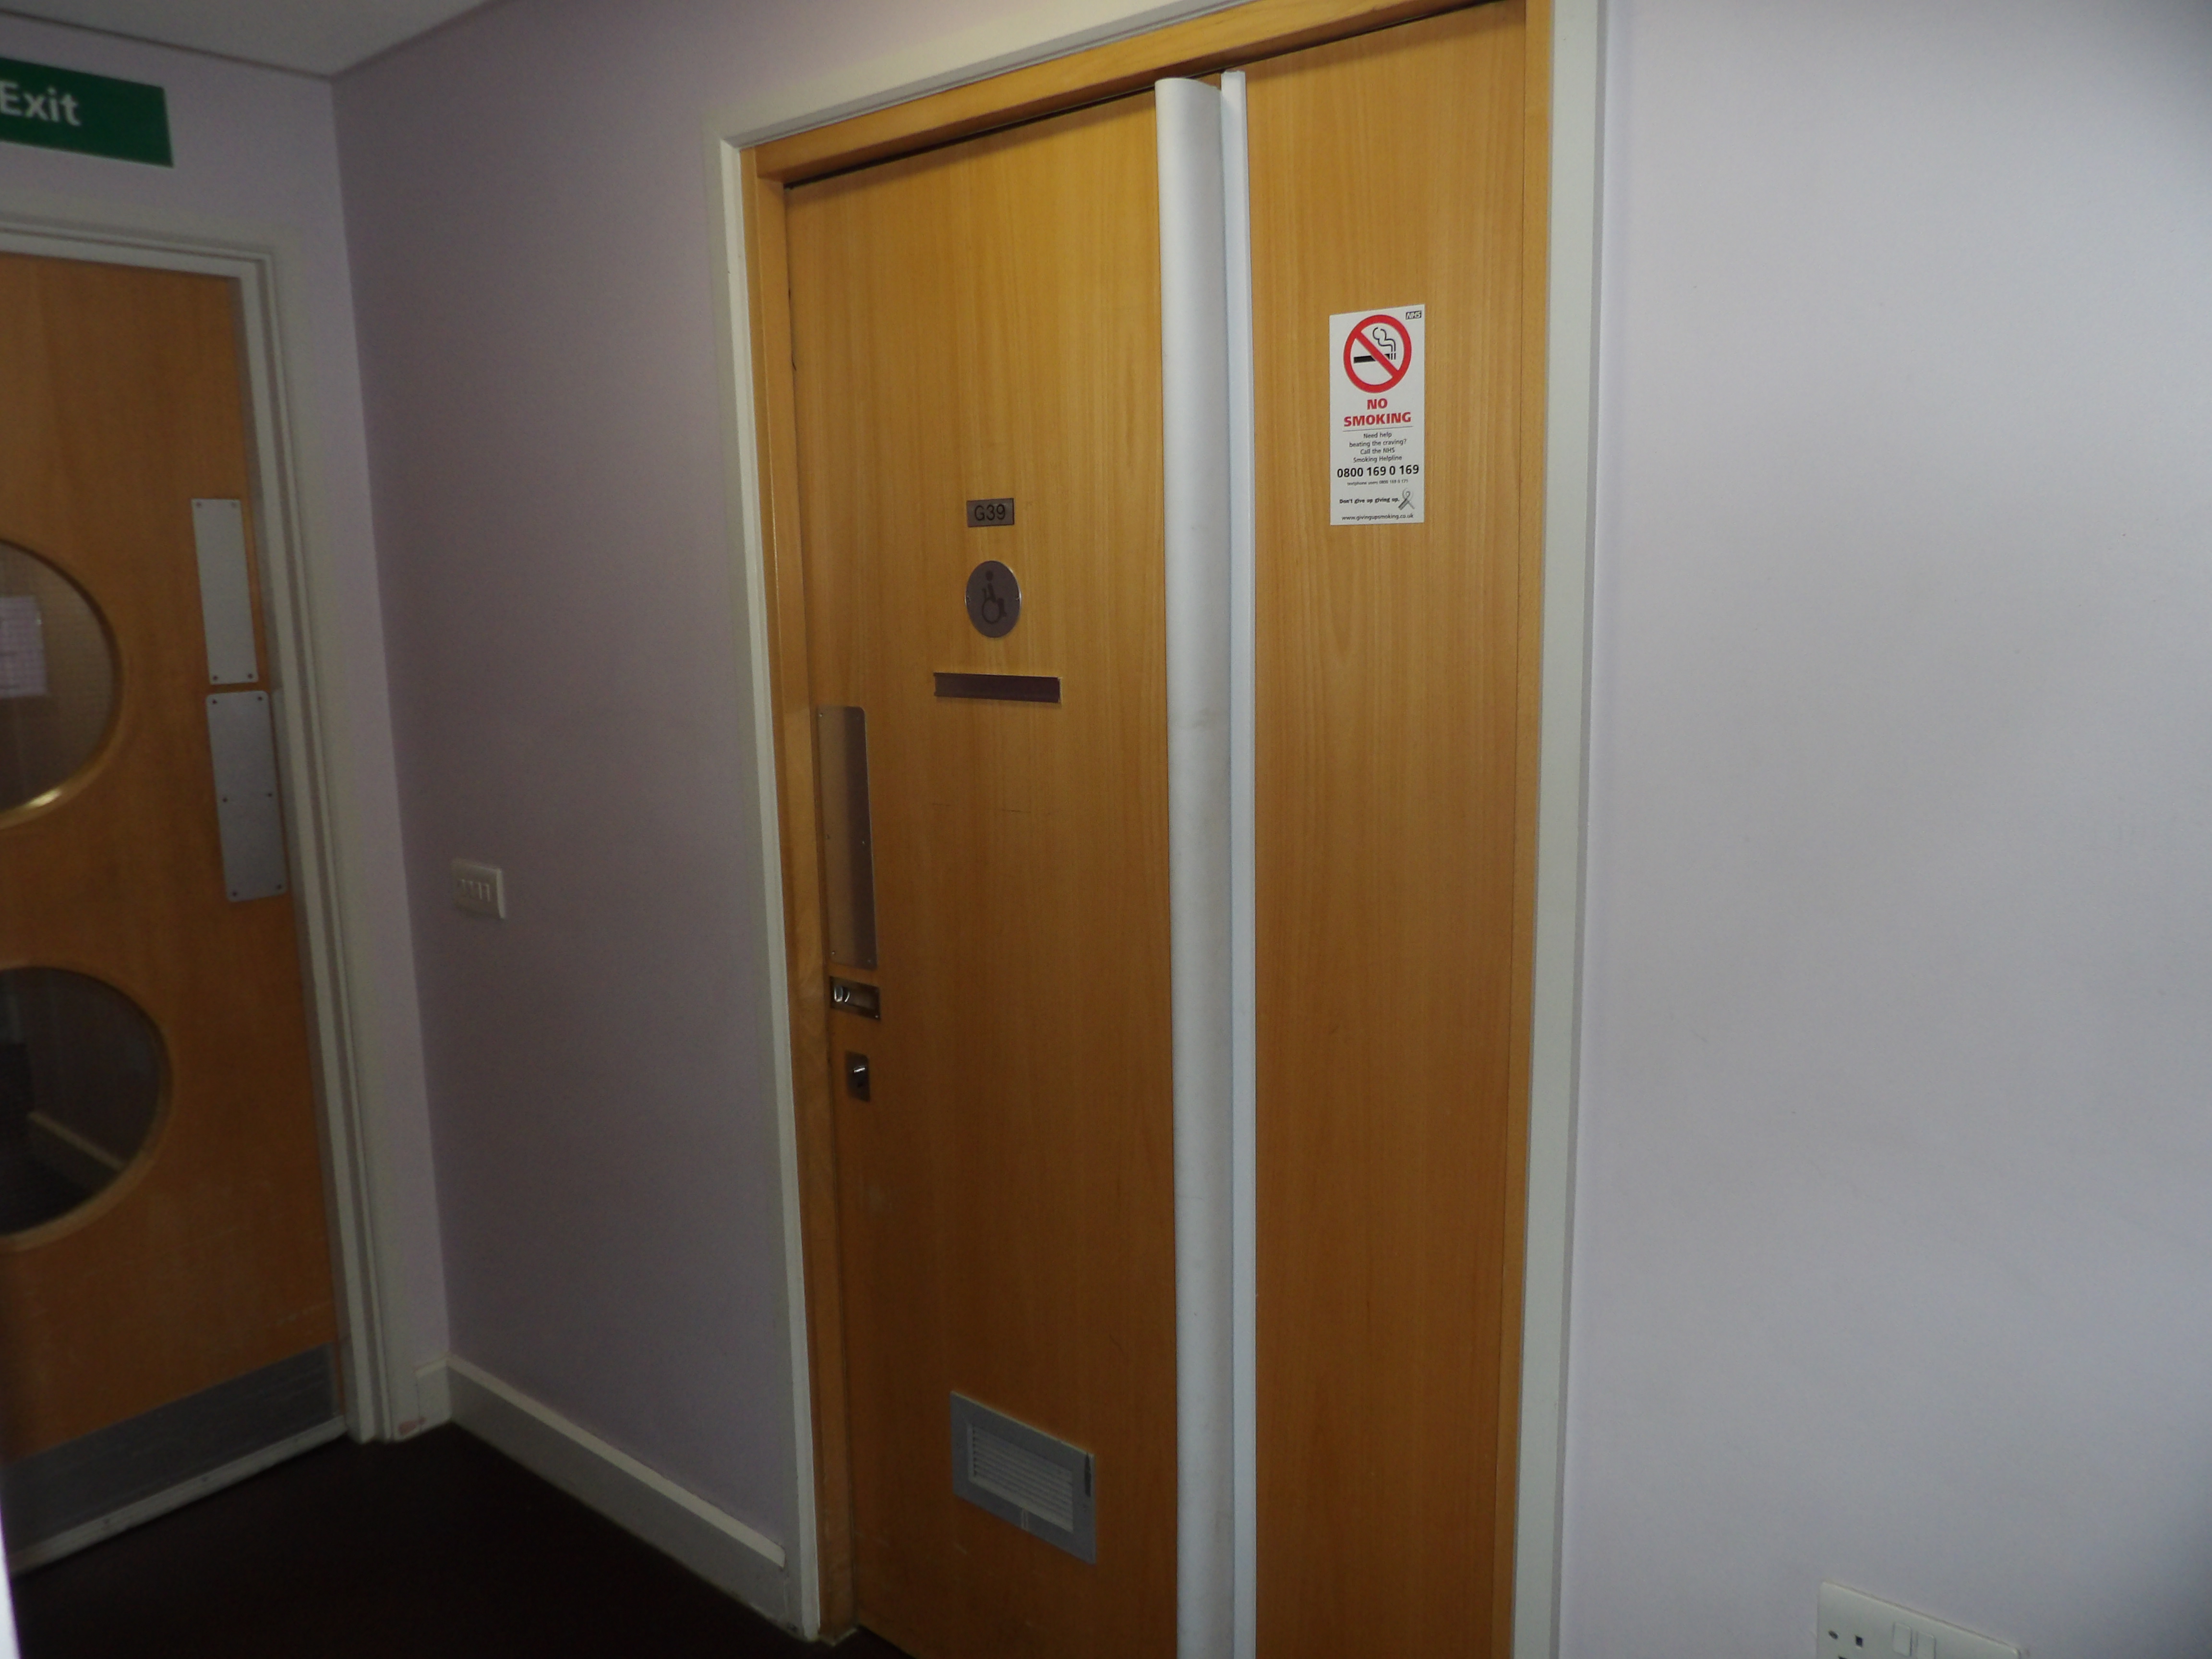 We have an accessible toilet. Please check if you have a large wheelchair.